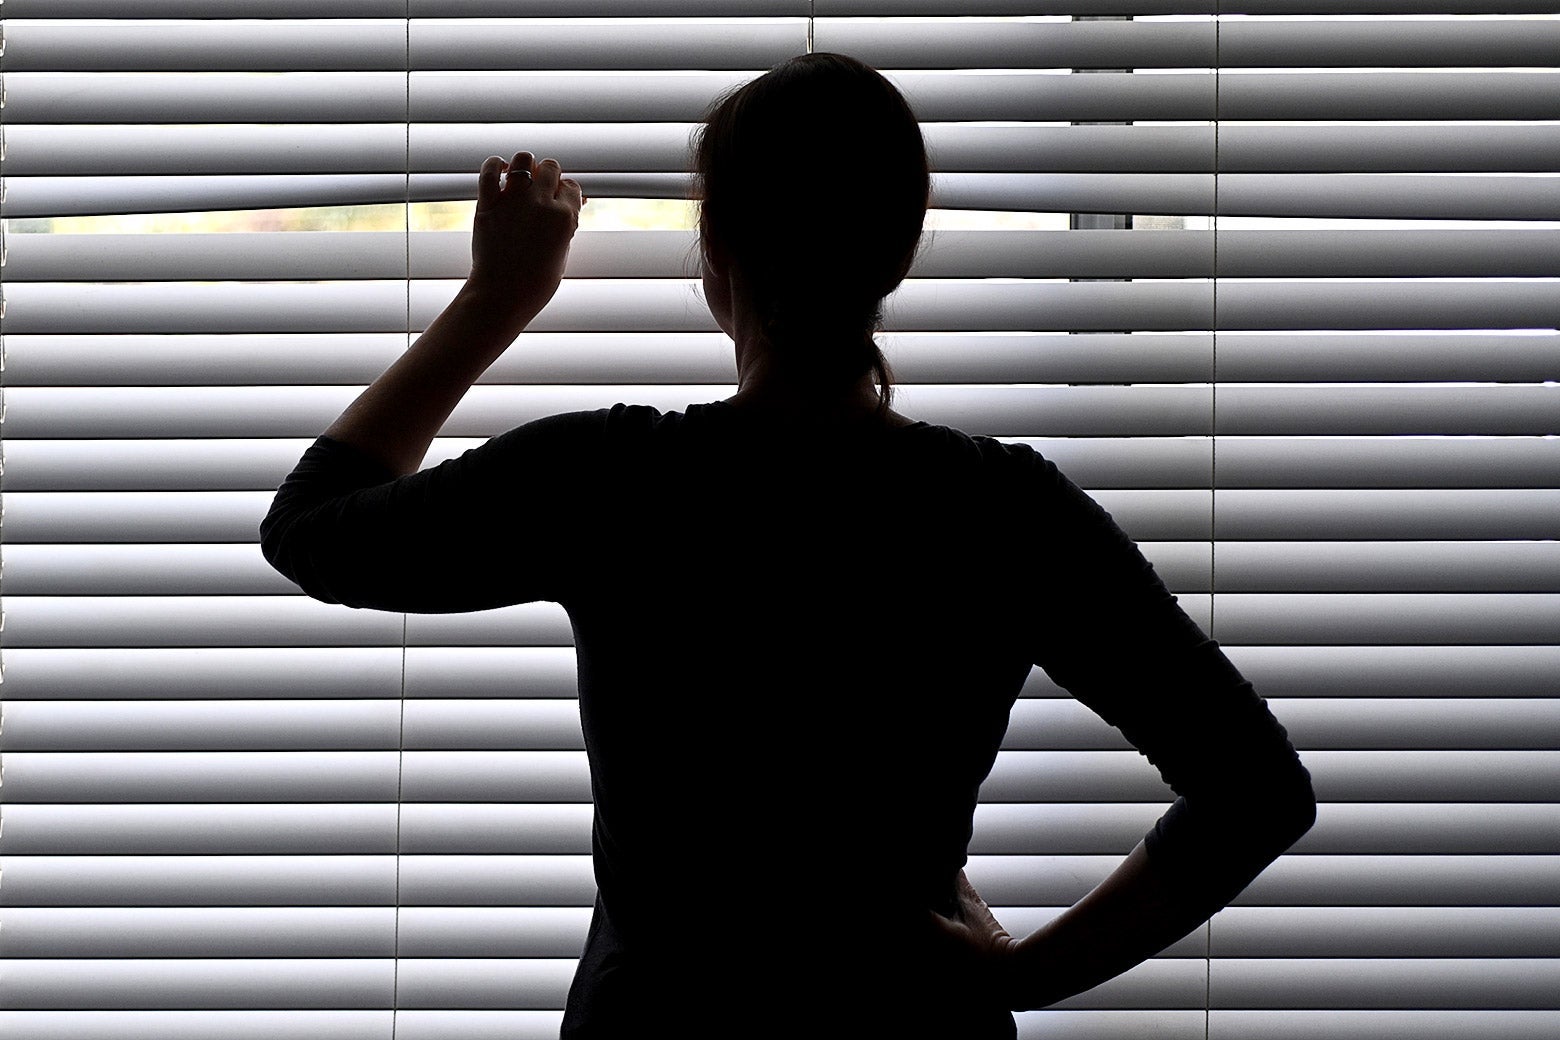 A silhouette of a woman in a dark room peeping through shutters at glimpses of sunlight